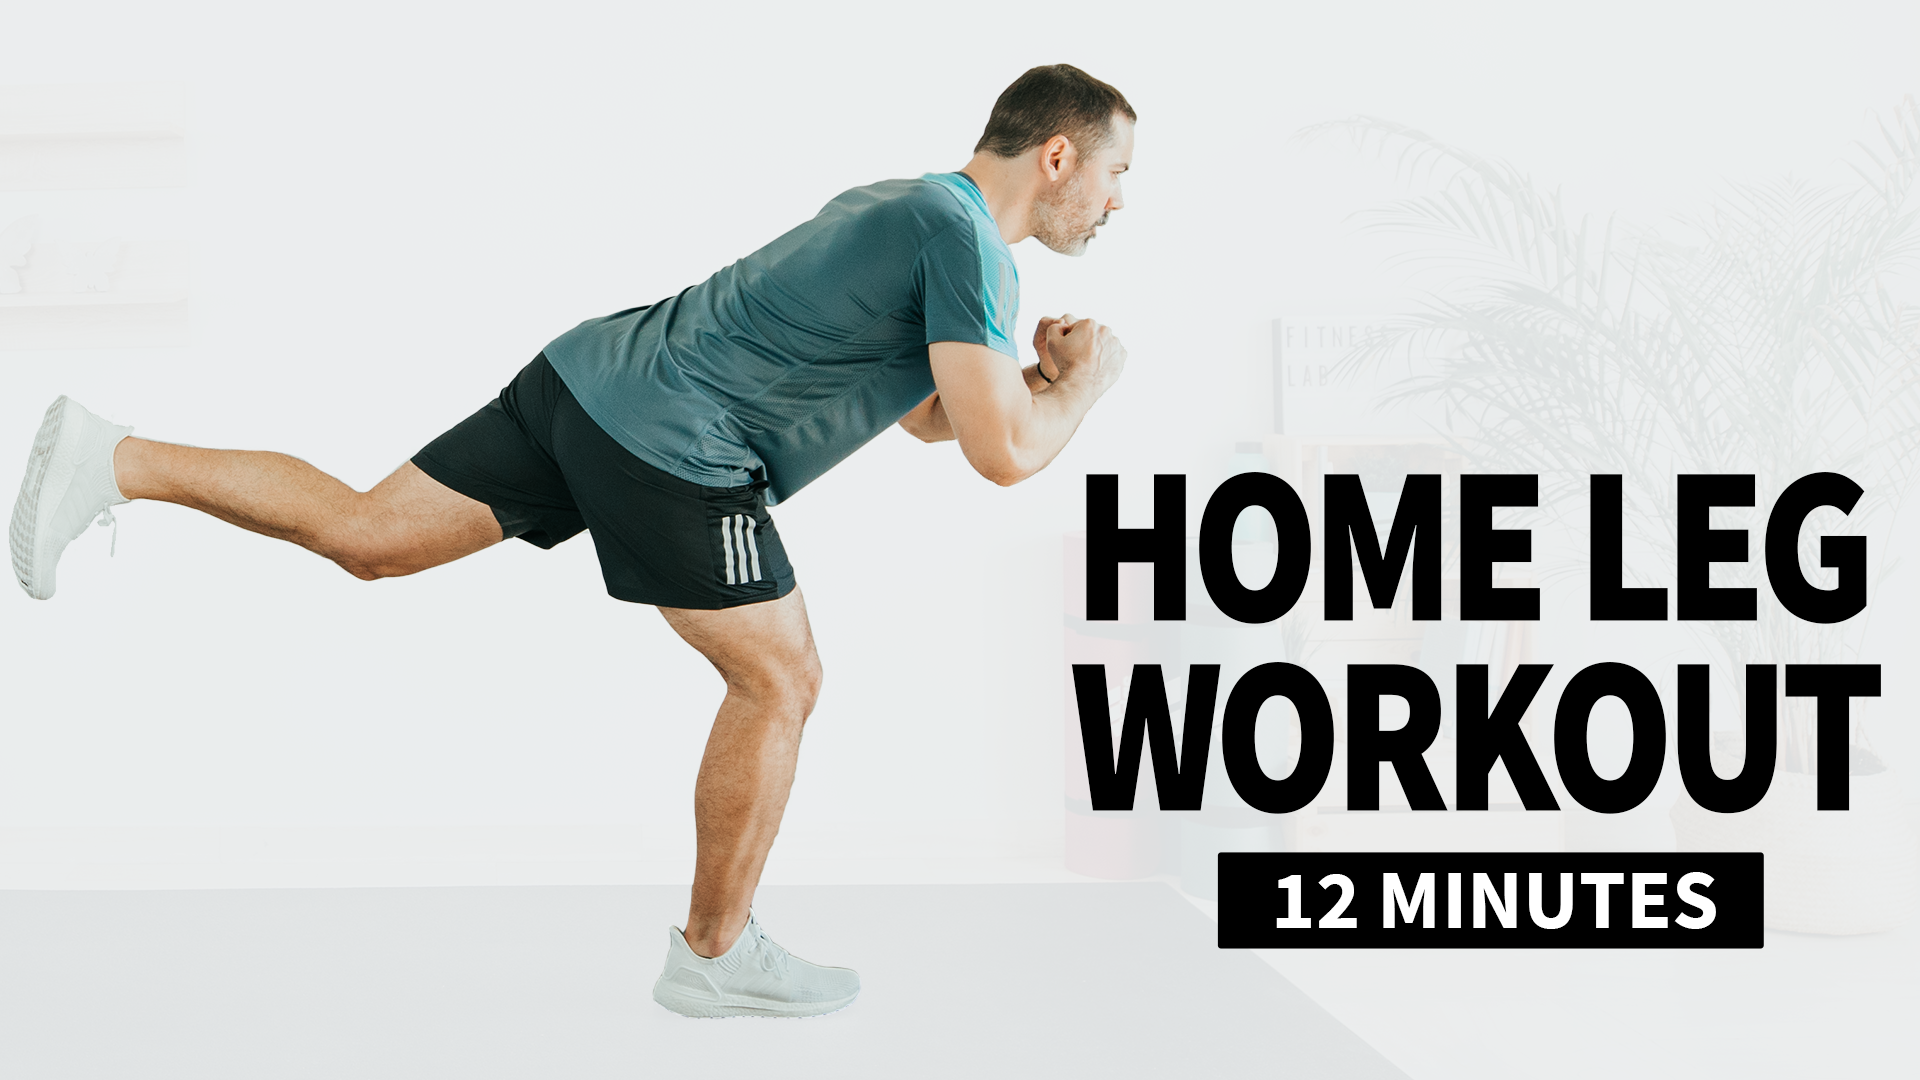 How To Workout Legs From Home | No Equipment